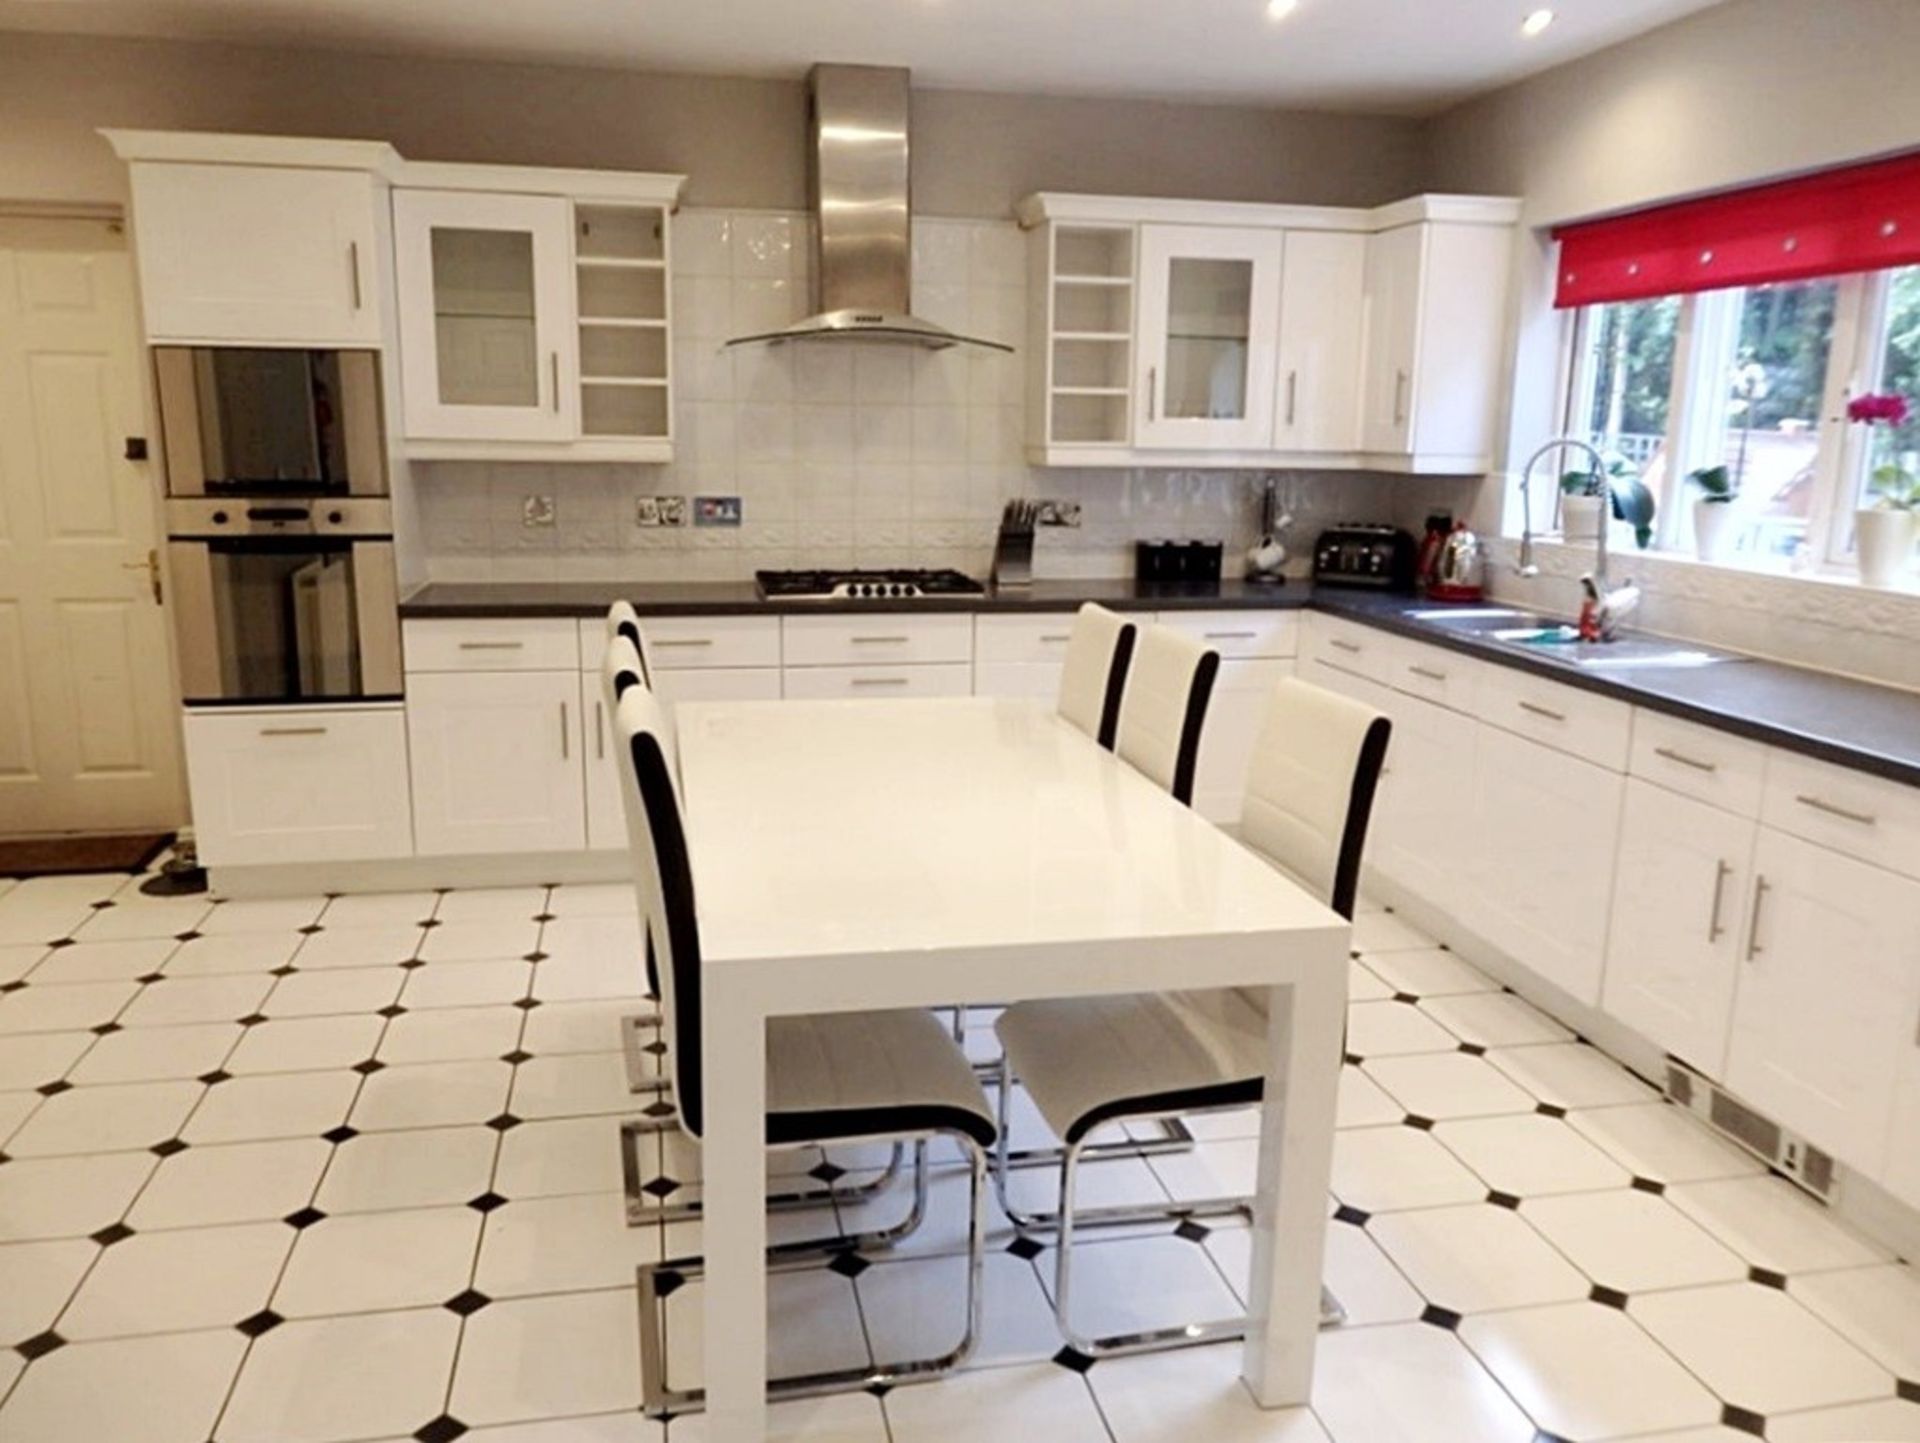 1 x White High Gloss Kitchen With Neff Integrated Dishwasher, 5 Ring Stainless Steel Hob, and